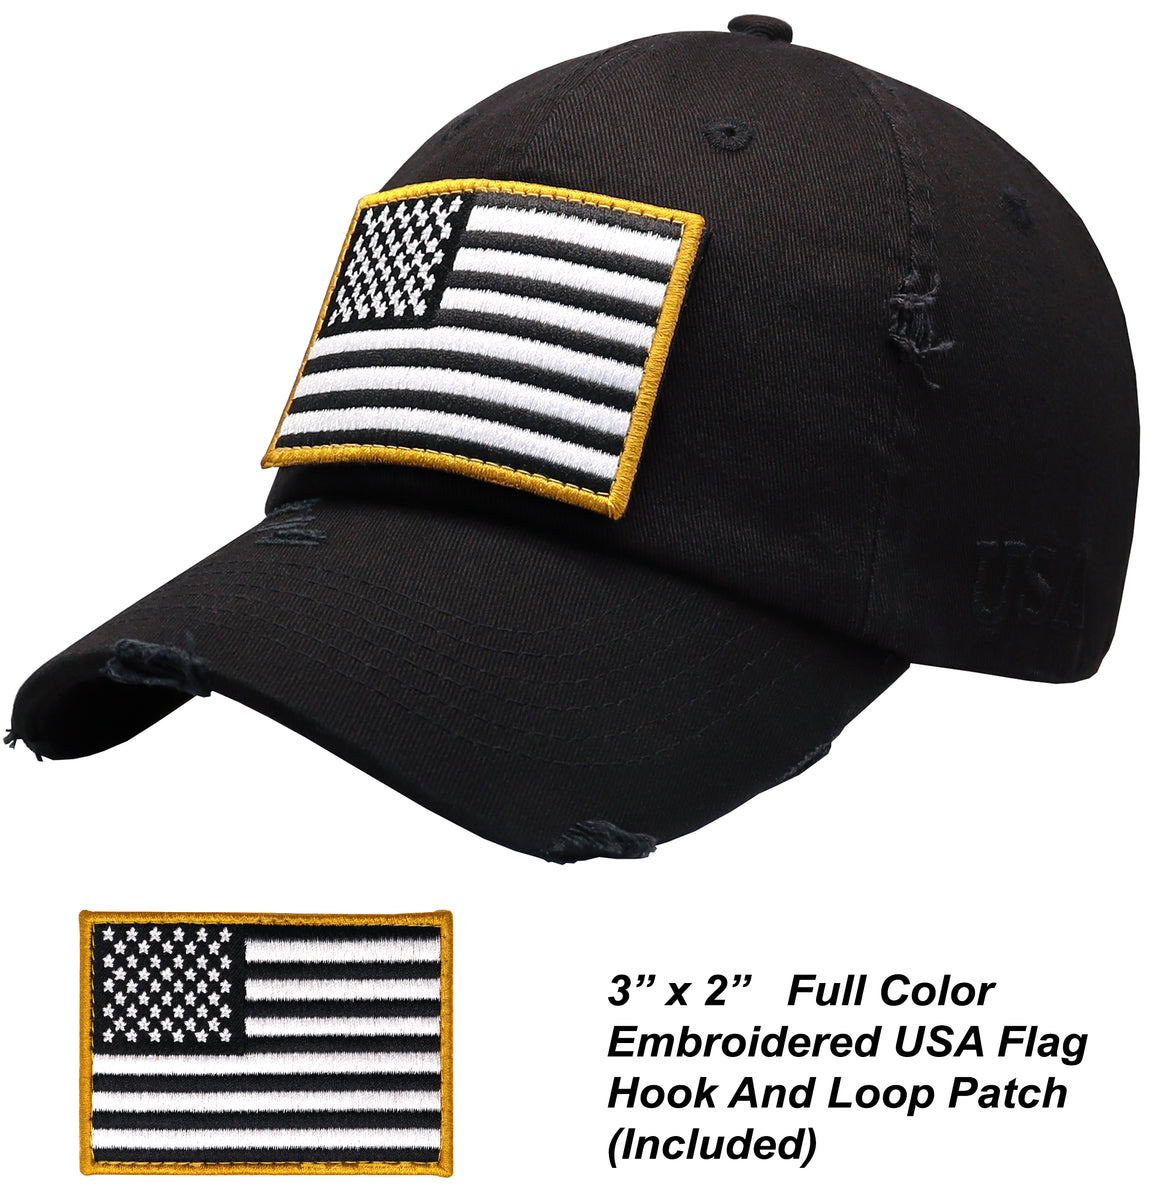 Antourage American Flag Hat for Men and Women